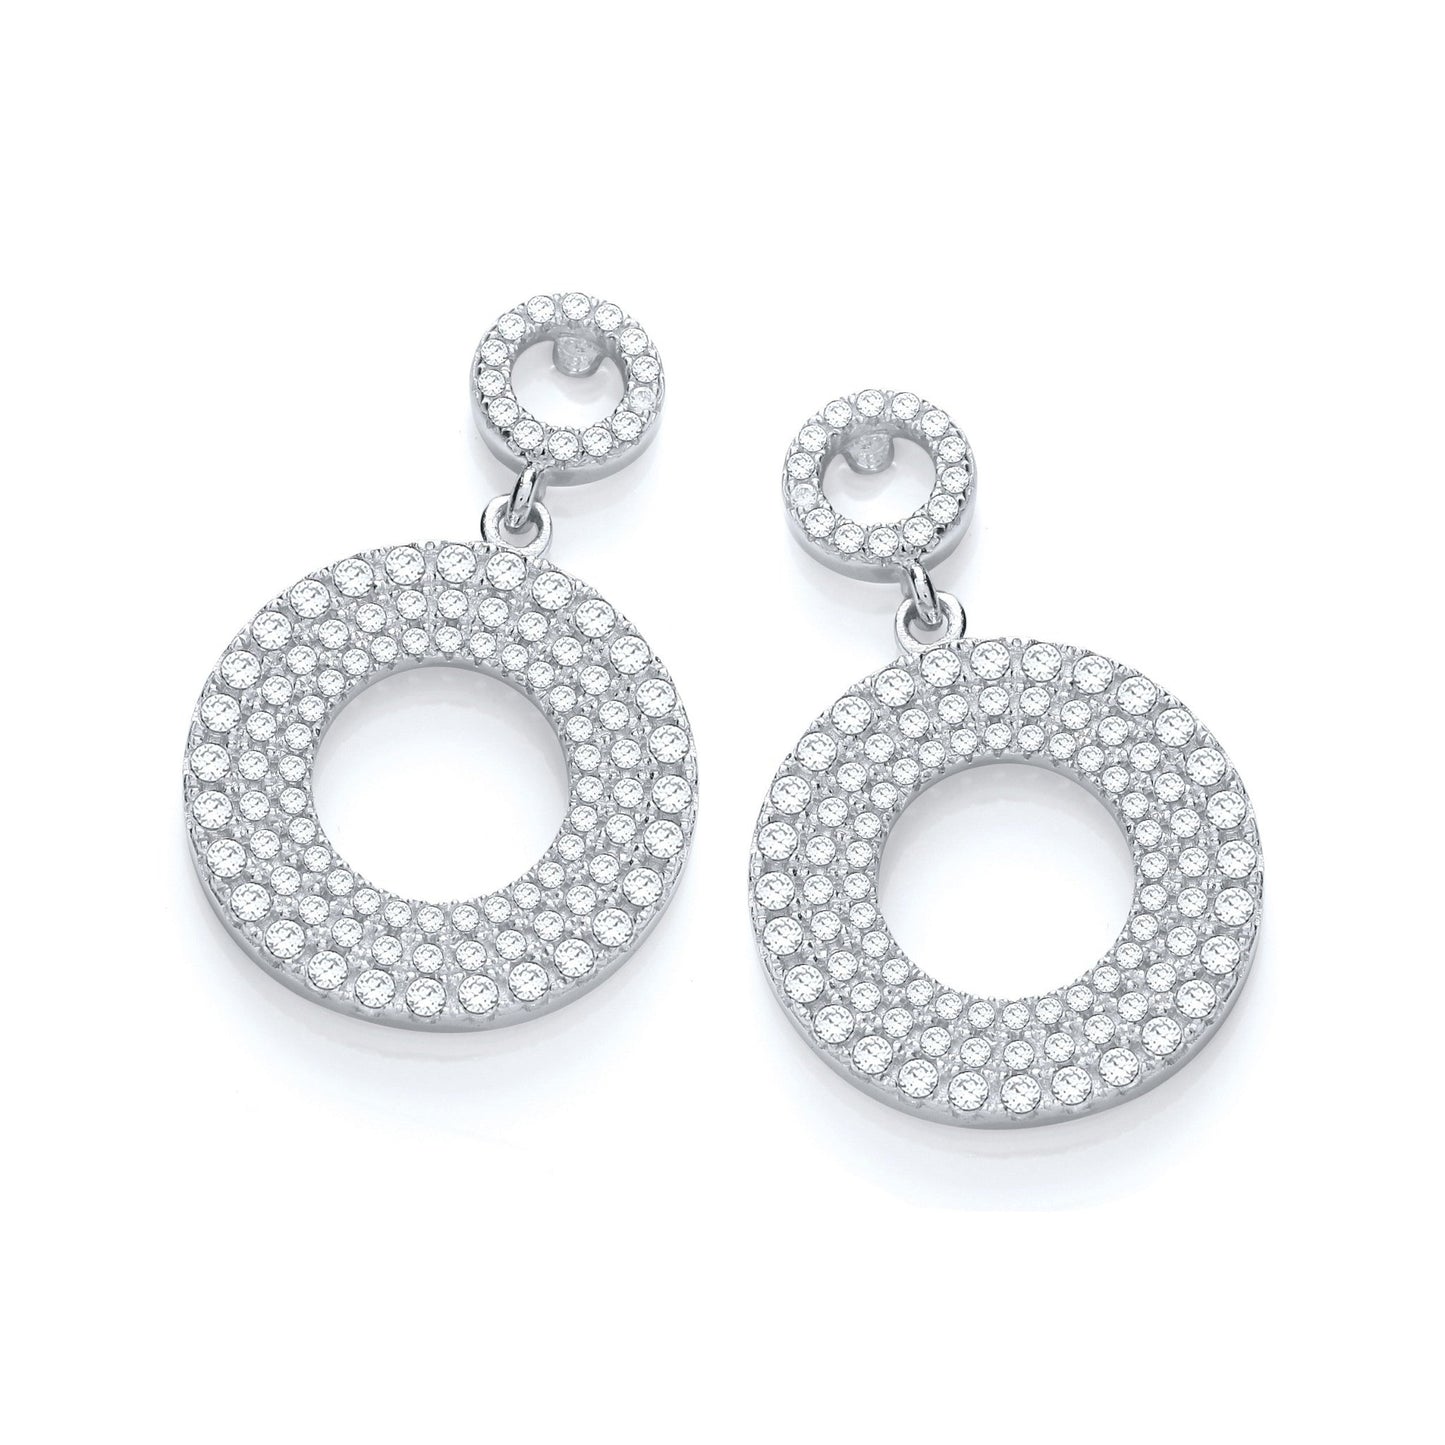 Drop 925 Sterling Silver Circle Earrings Set With CZs - FJewellery